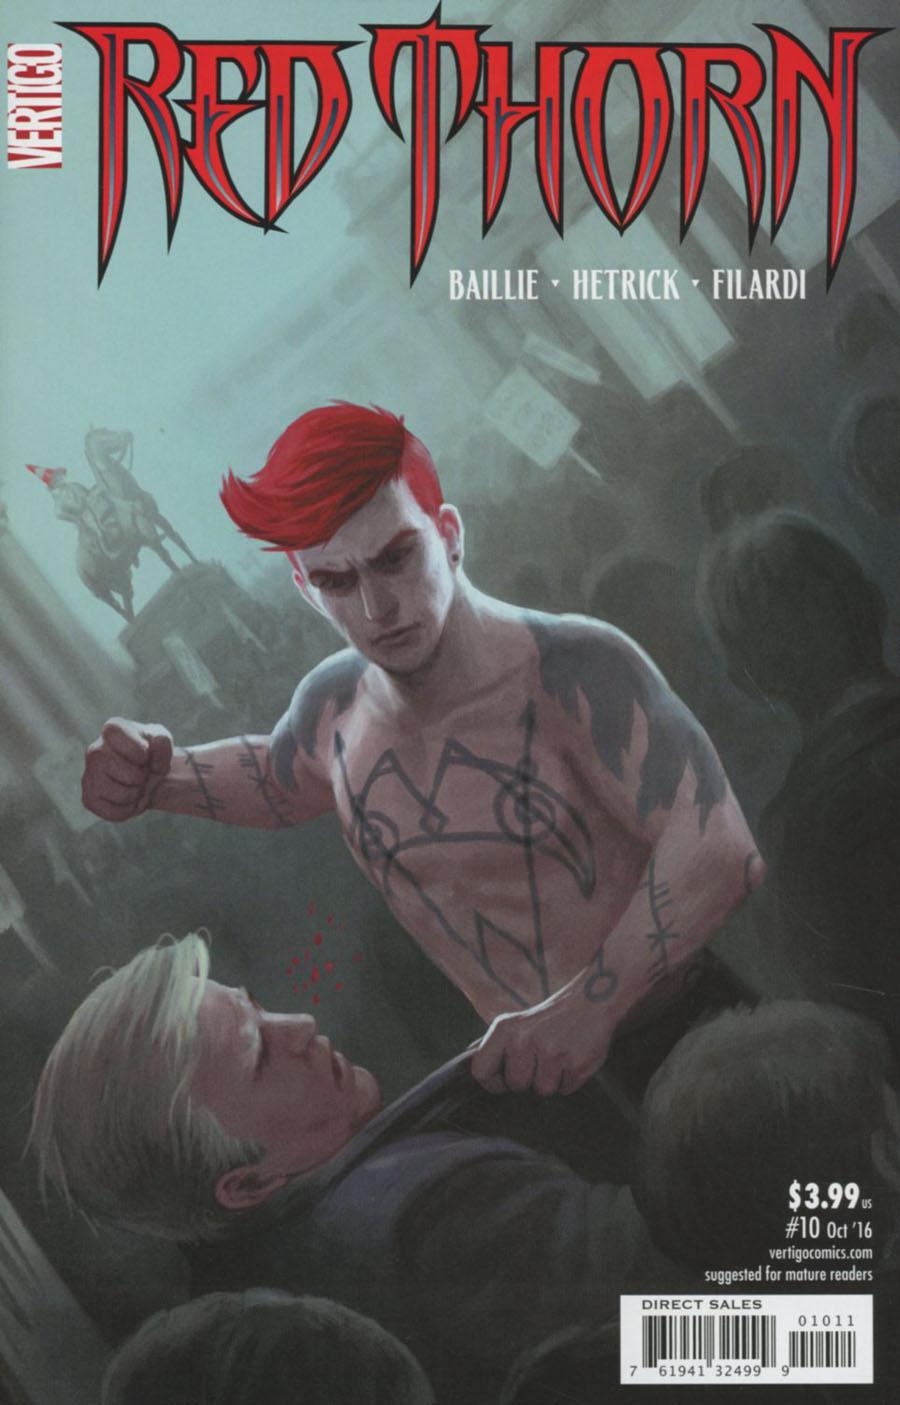 Red Thorn Vol. 1 #10